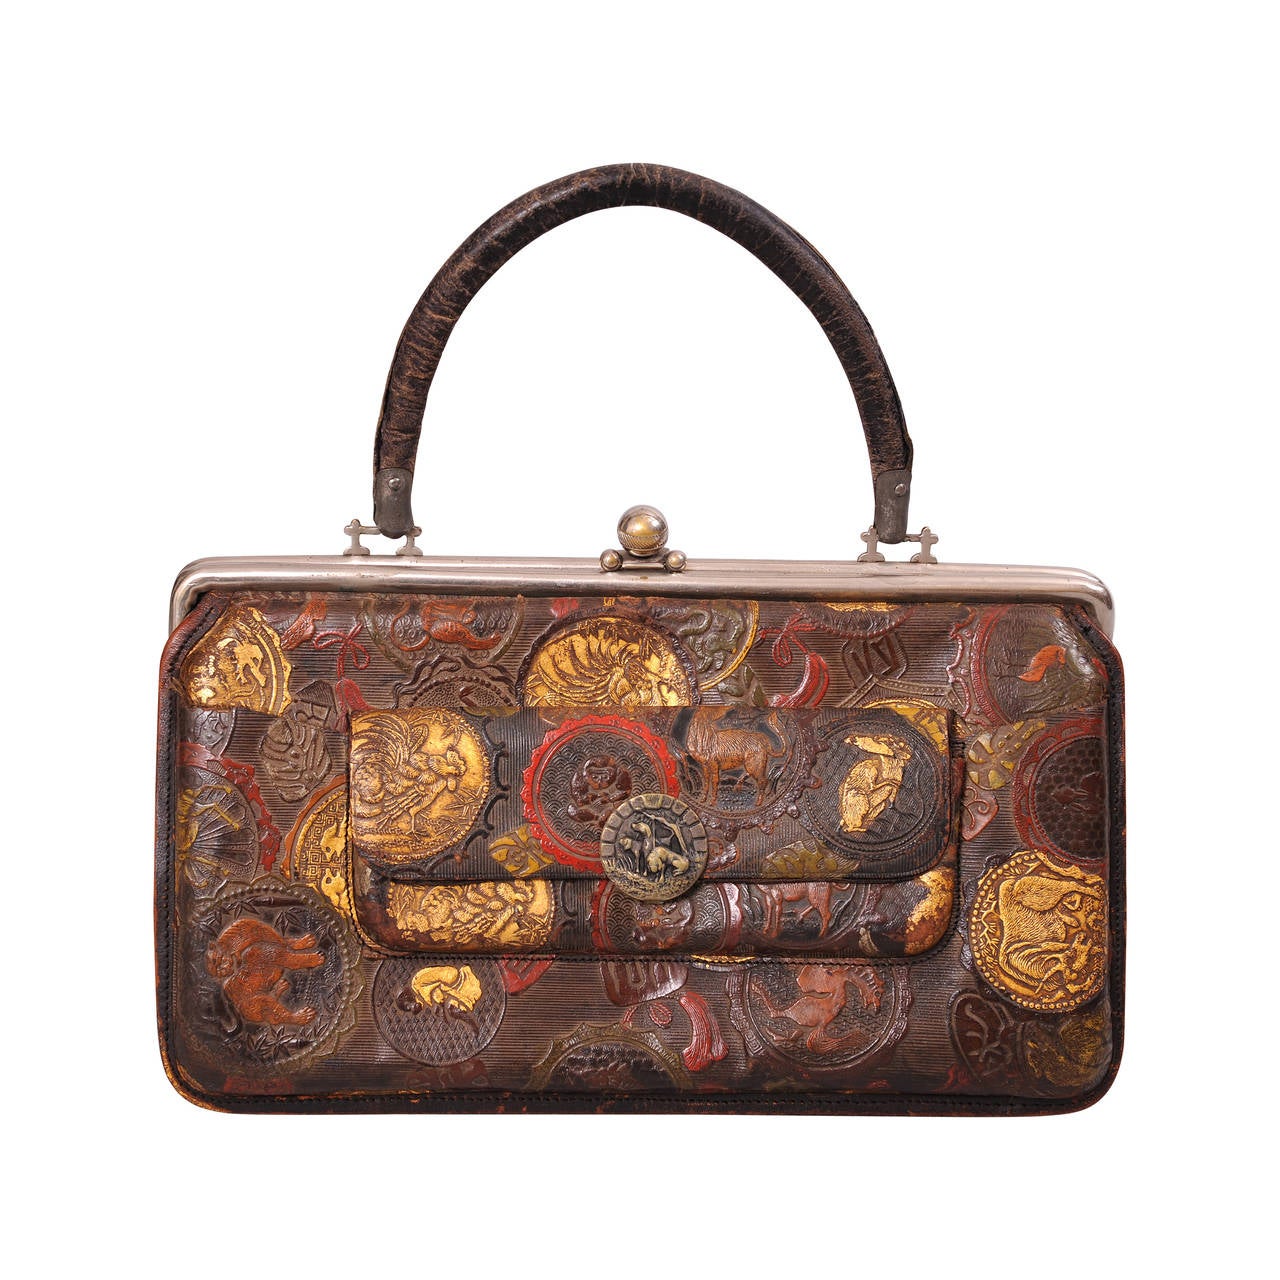 Antique Chinese Tooled Leather Bag, Dated 1878